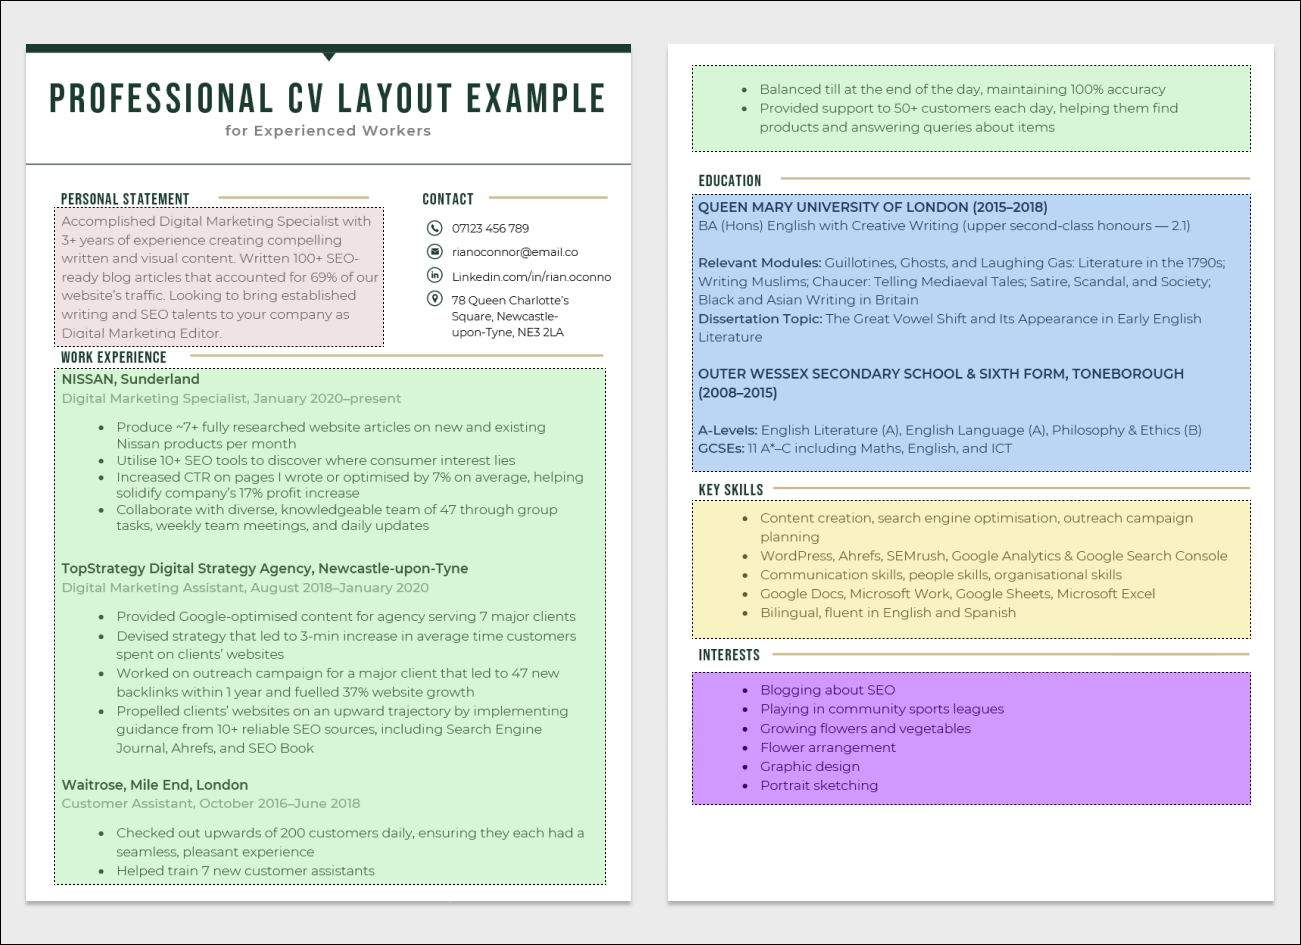 An example of a two-page side-by-side professional CV layout with its sections highlighted in different coloured boxes on a light grey background to illustrate the correct way to set out a CV for an experienced worker.